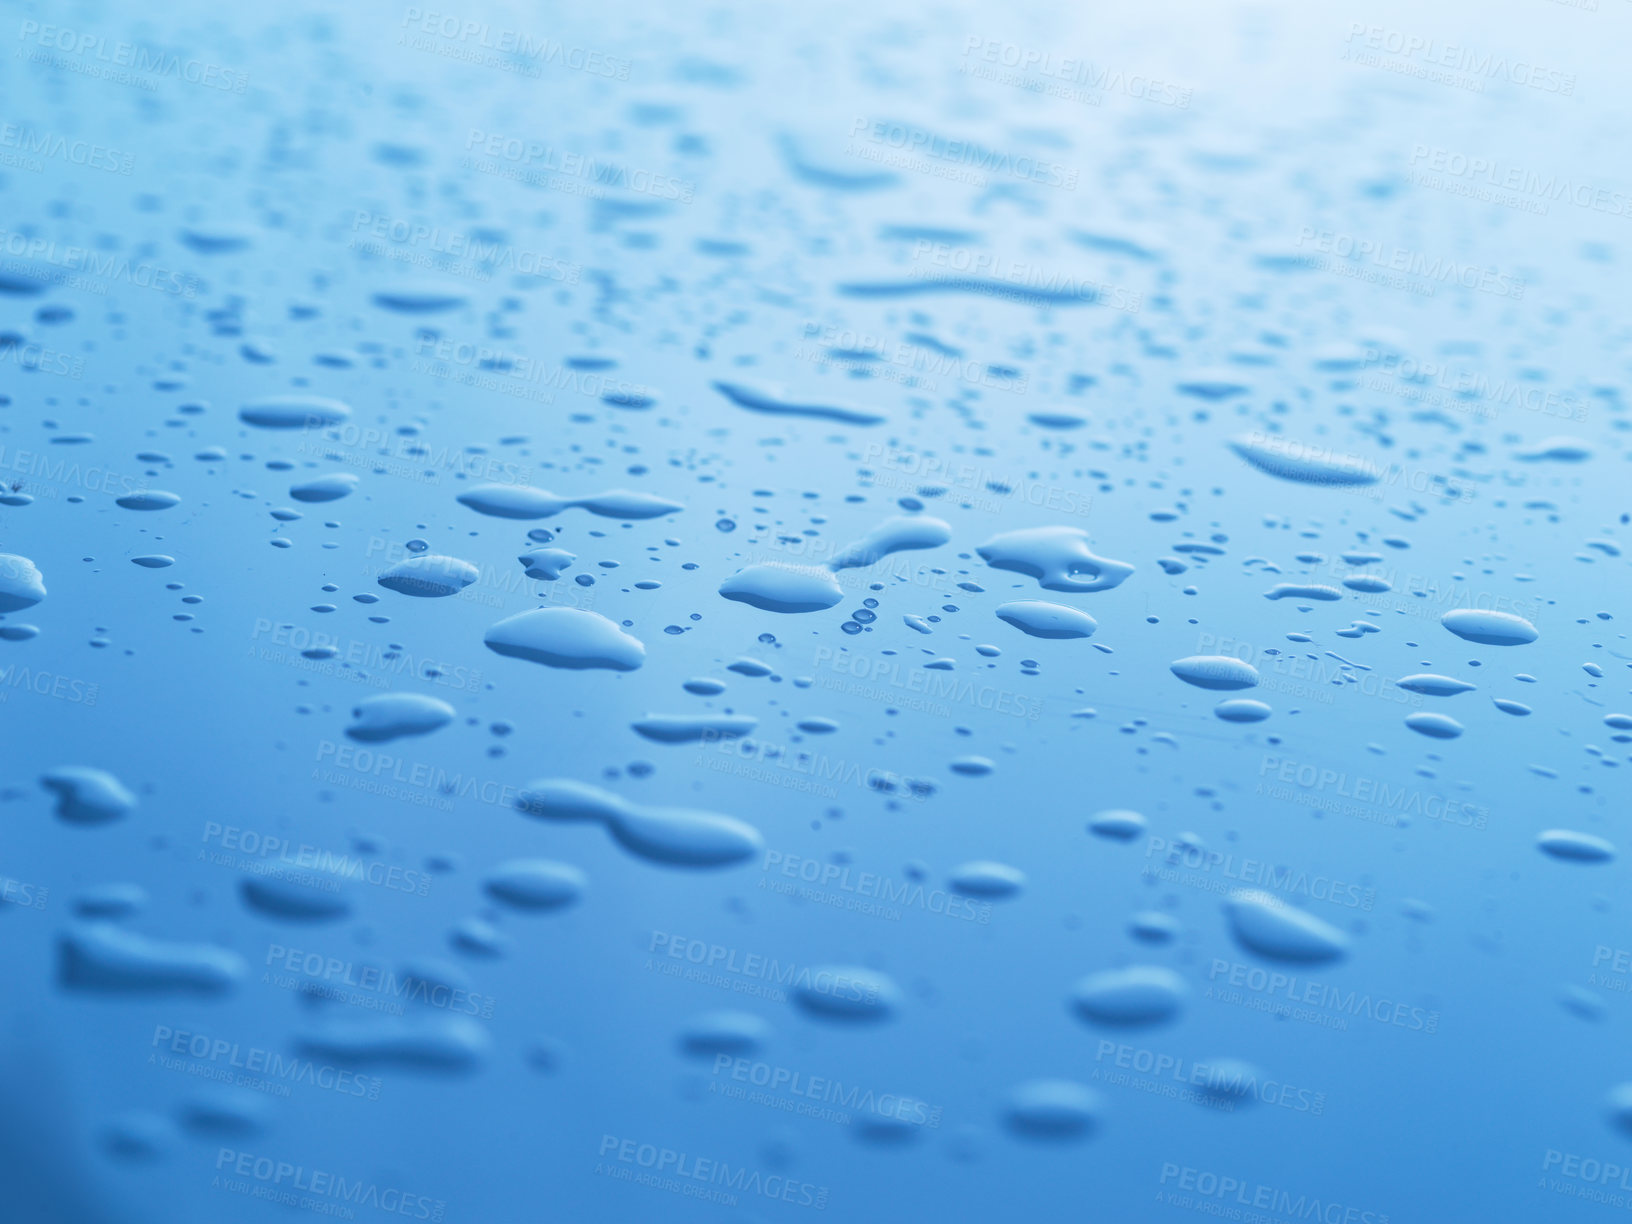 Buy stock photo Copy space and closeup of water raindrops or condensation forming on smooth blue surface after rainfall or shower. Texture detail or background of fresh, hydrating liquid after cooled steam or vapour